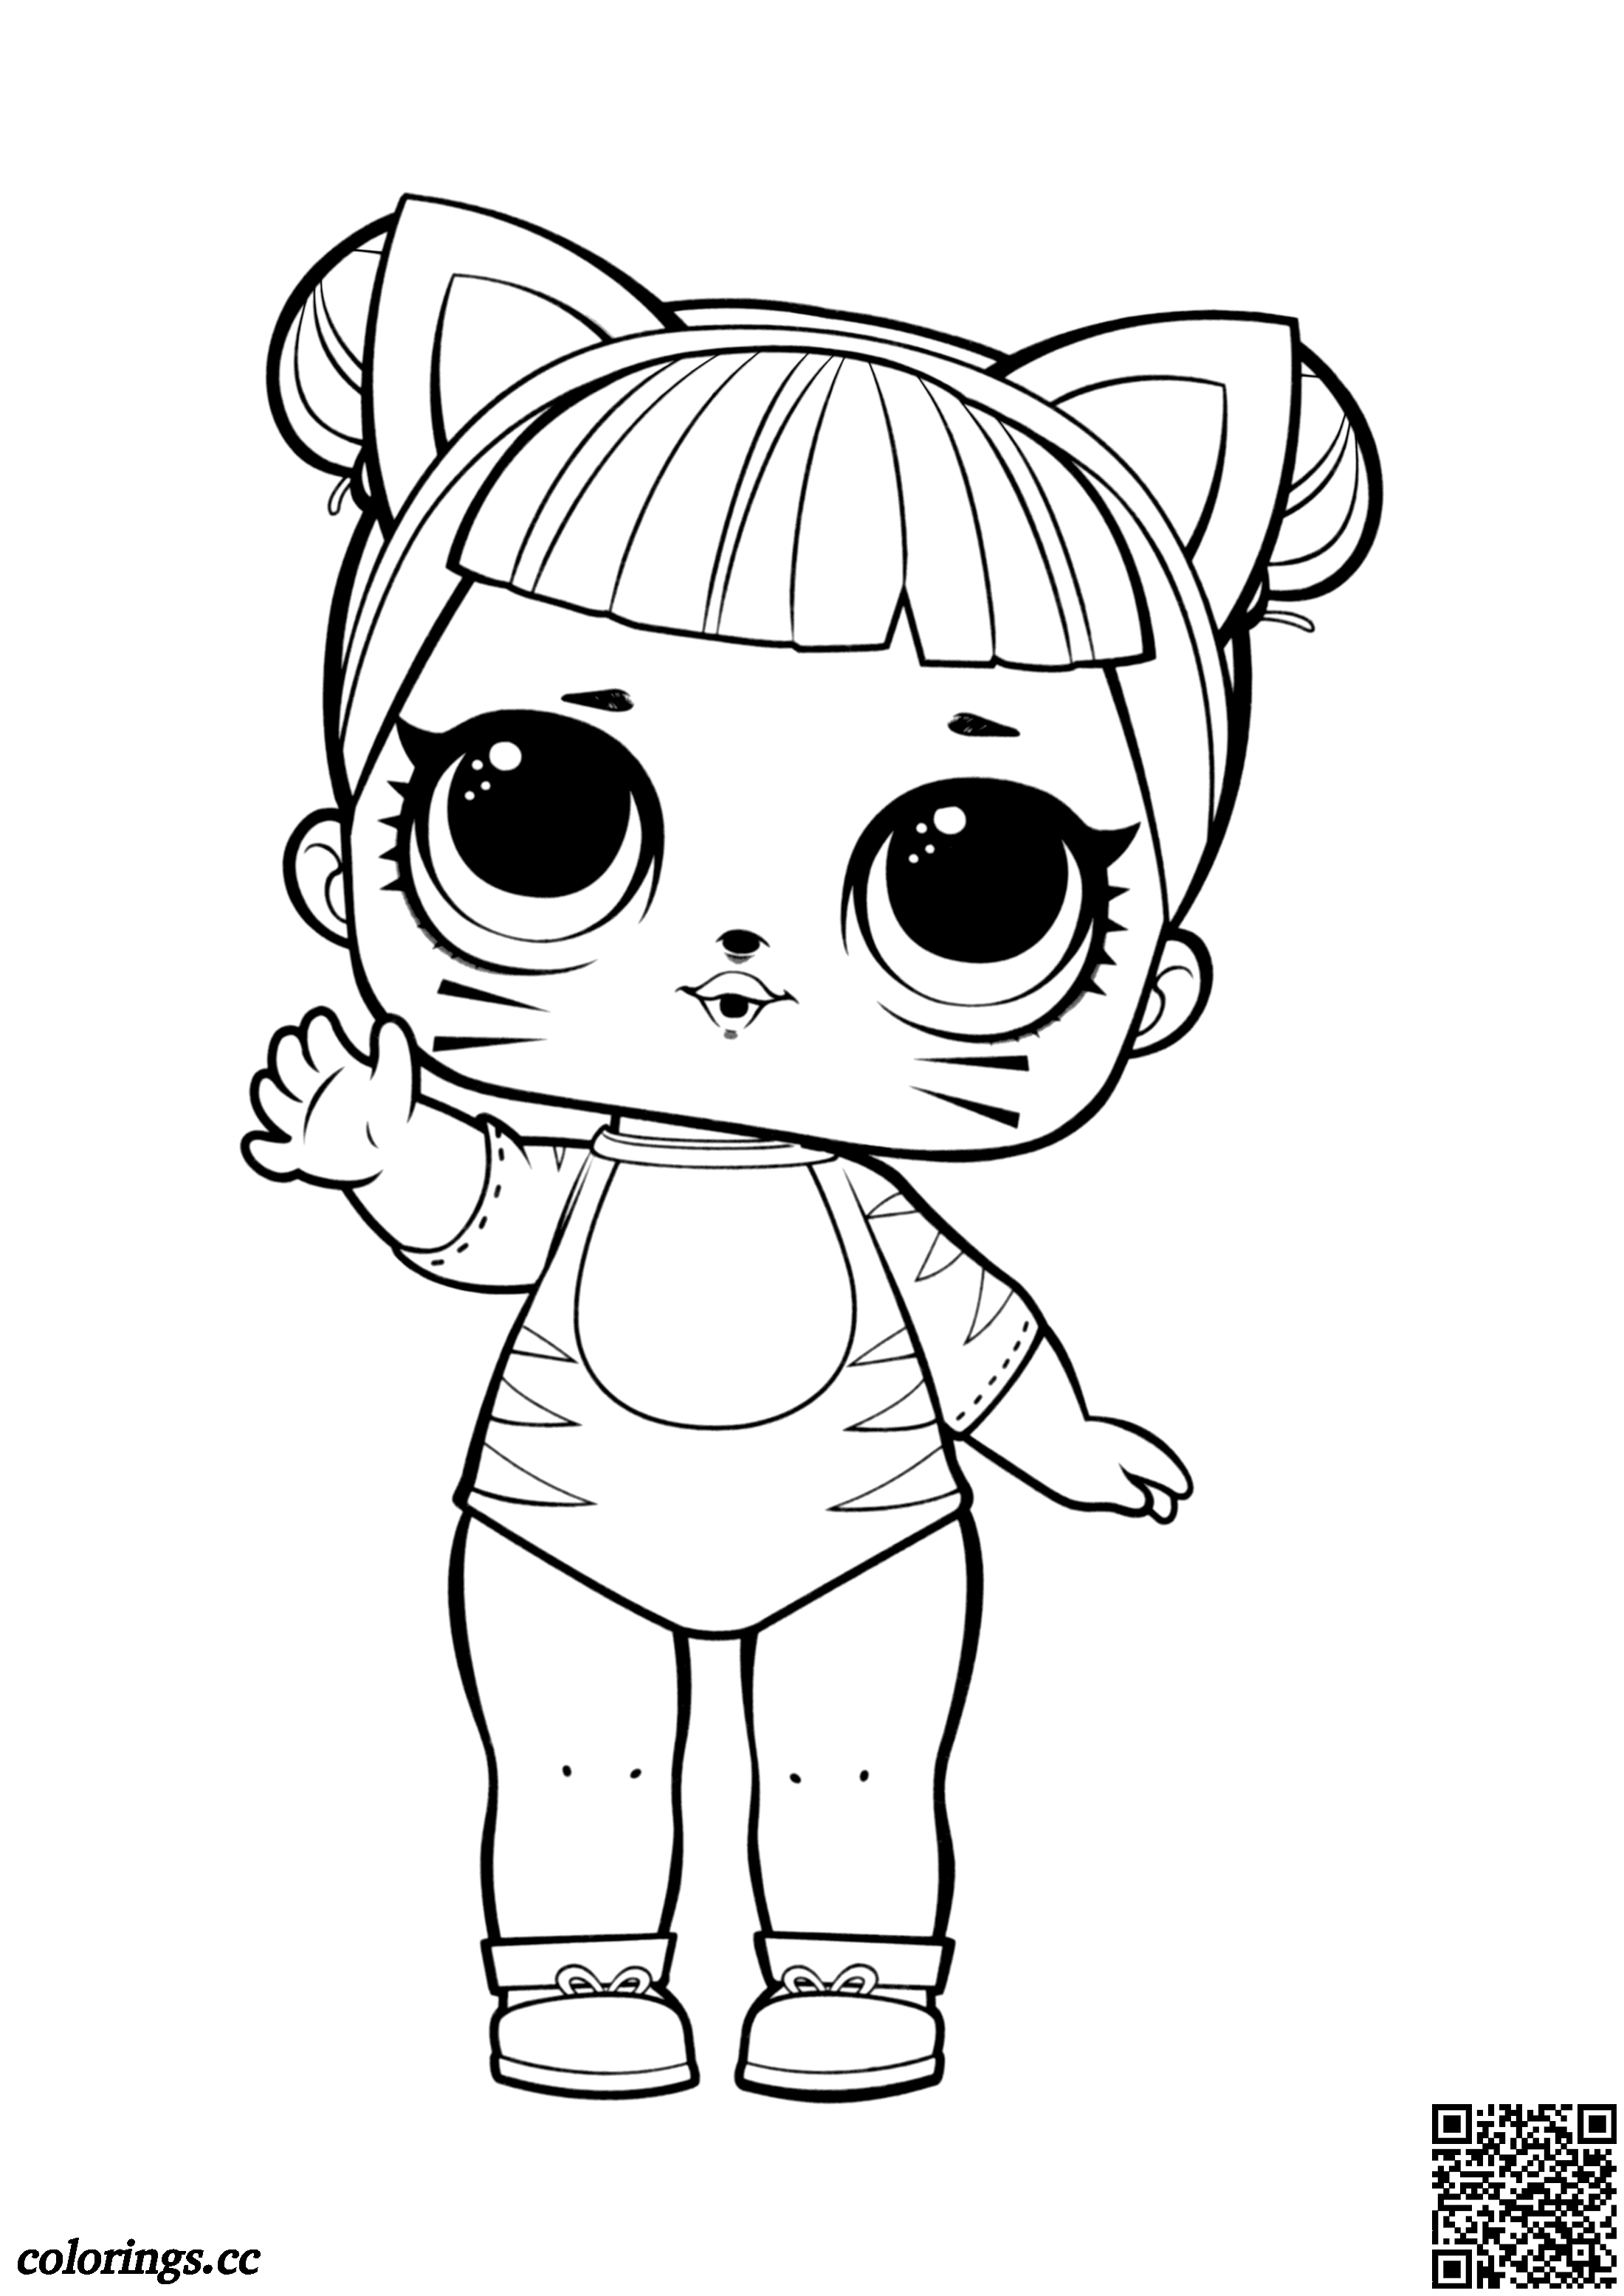 Coloring for girls L.O.L. Surprise   Baby Cat coloring pages, LOL ...